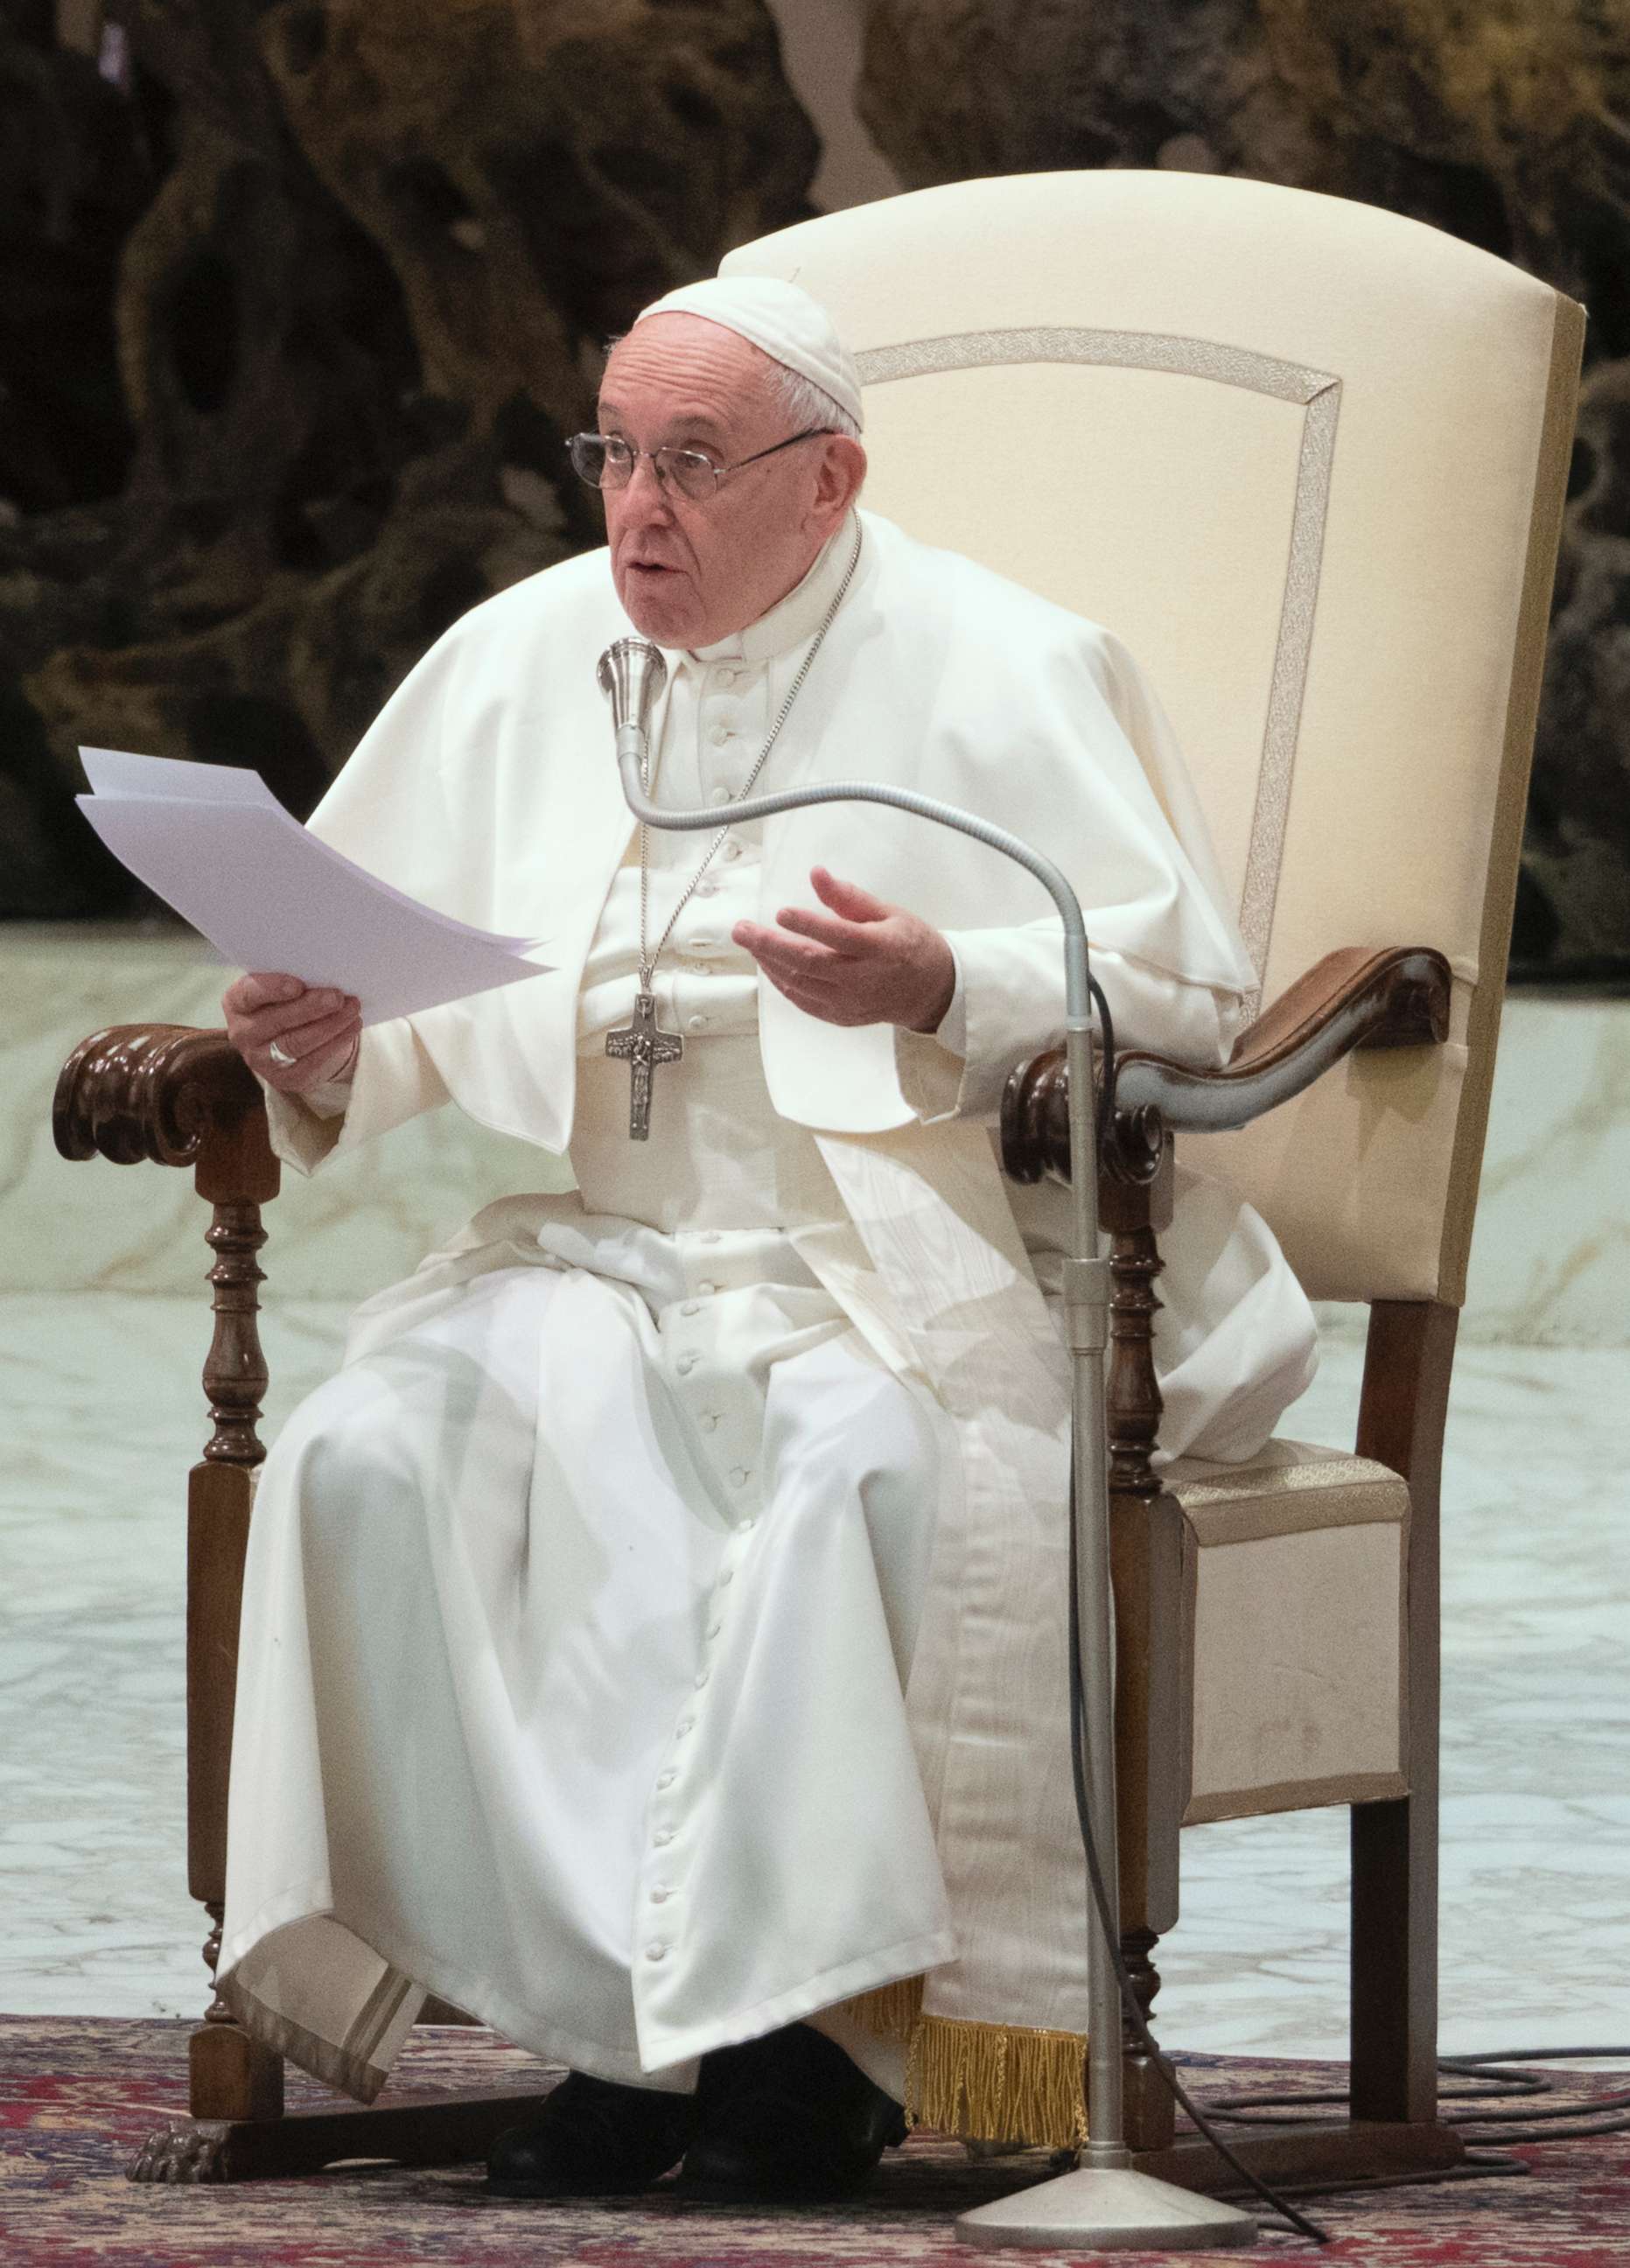 PHOTO: Pope Francis delivers his speech during his weekly general audience, in the Pope Paul VI hall at the Vatican, Feb. 13, 2019.